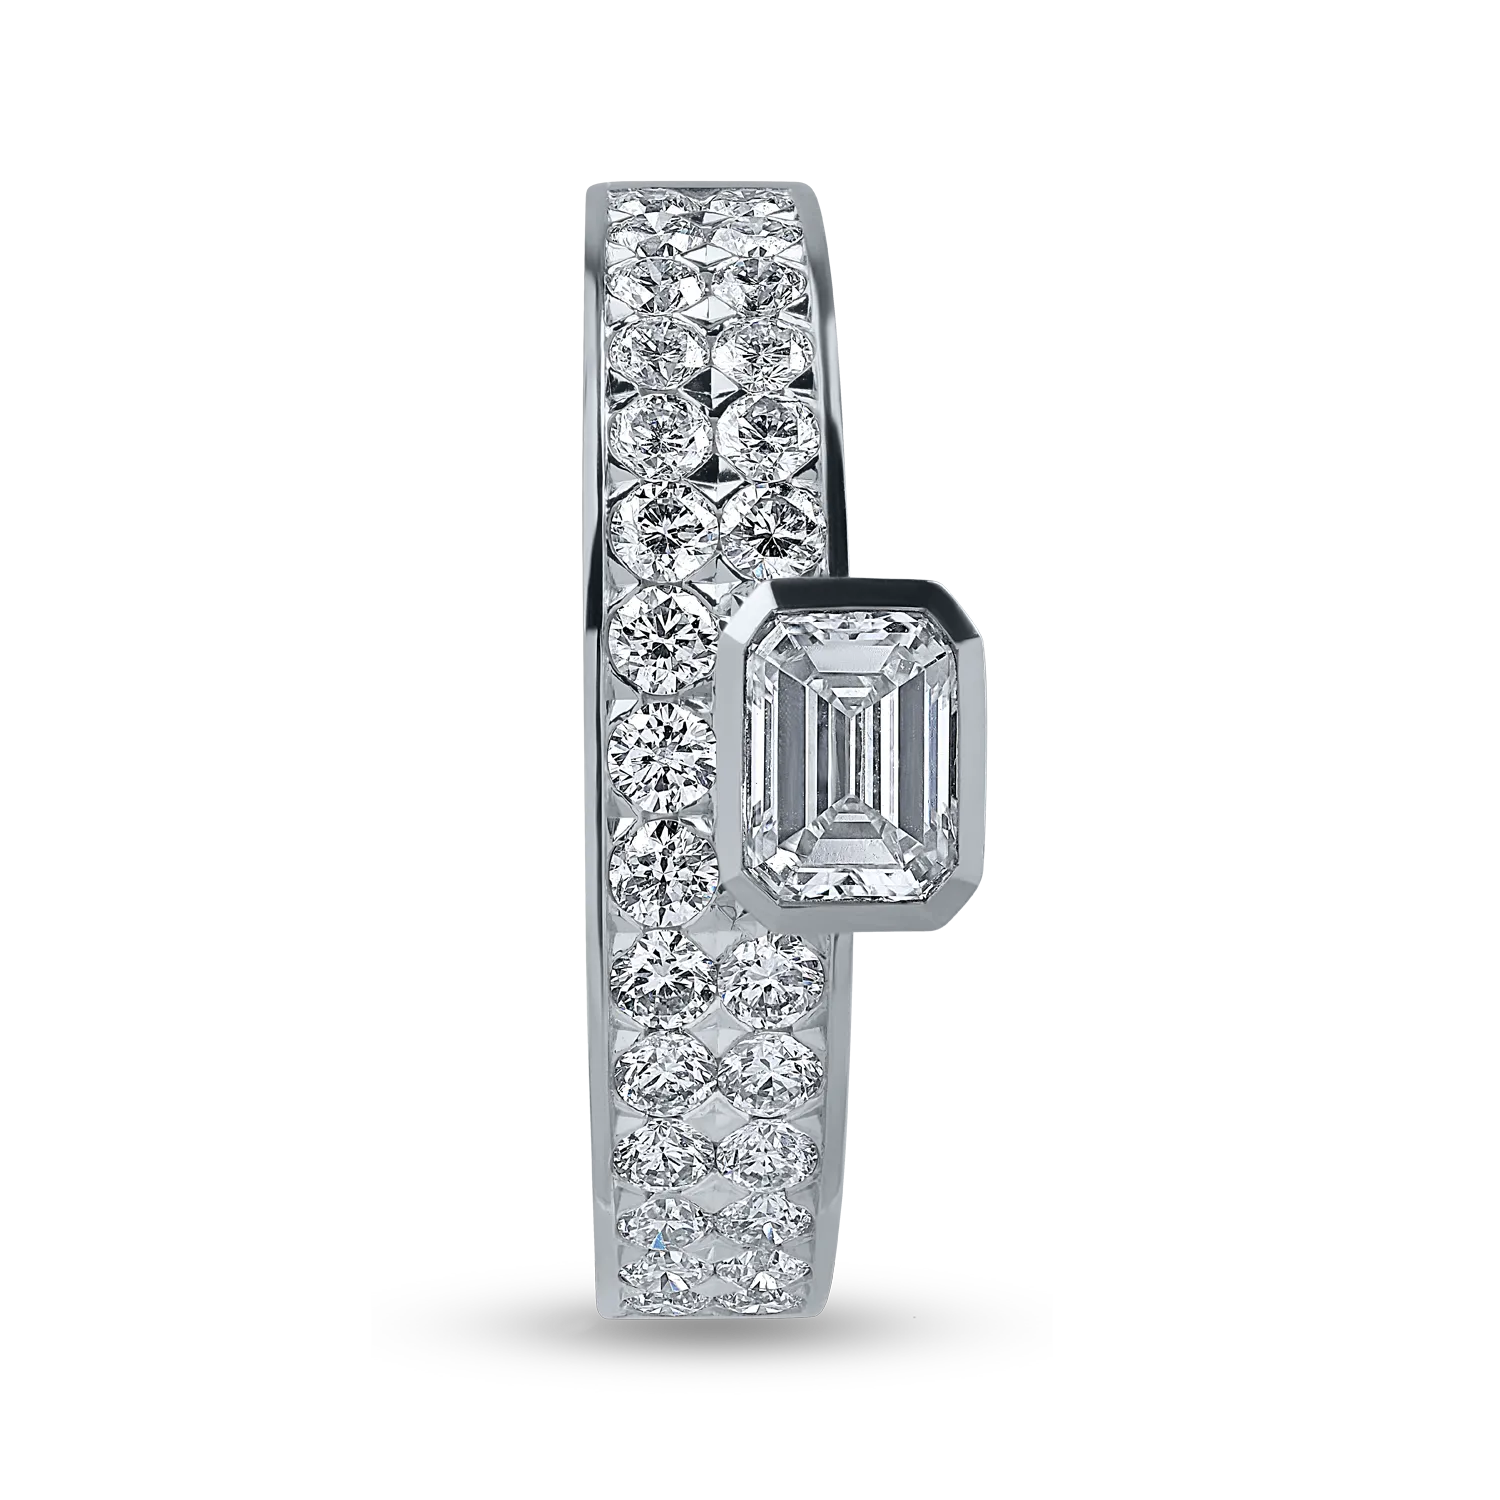 White gold ring with 1.09ct diamonds